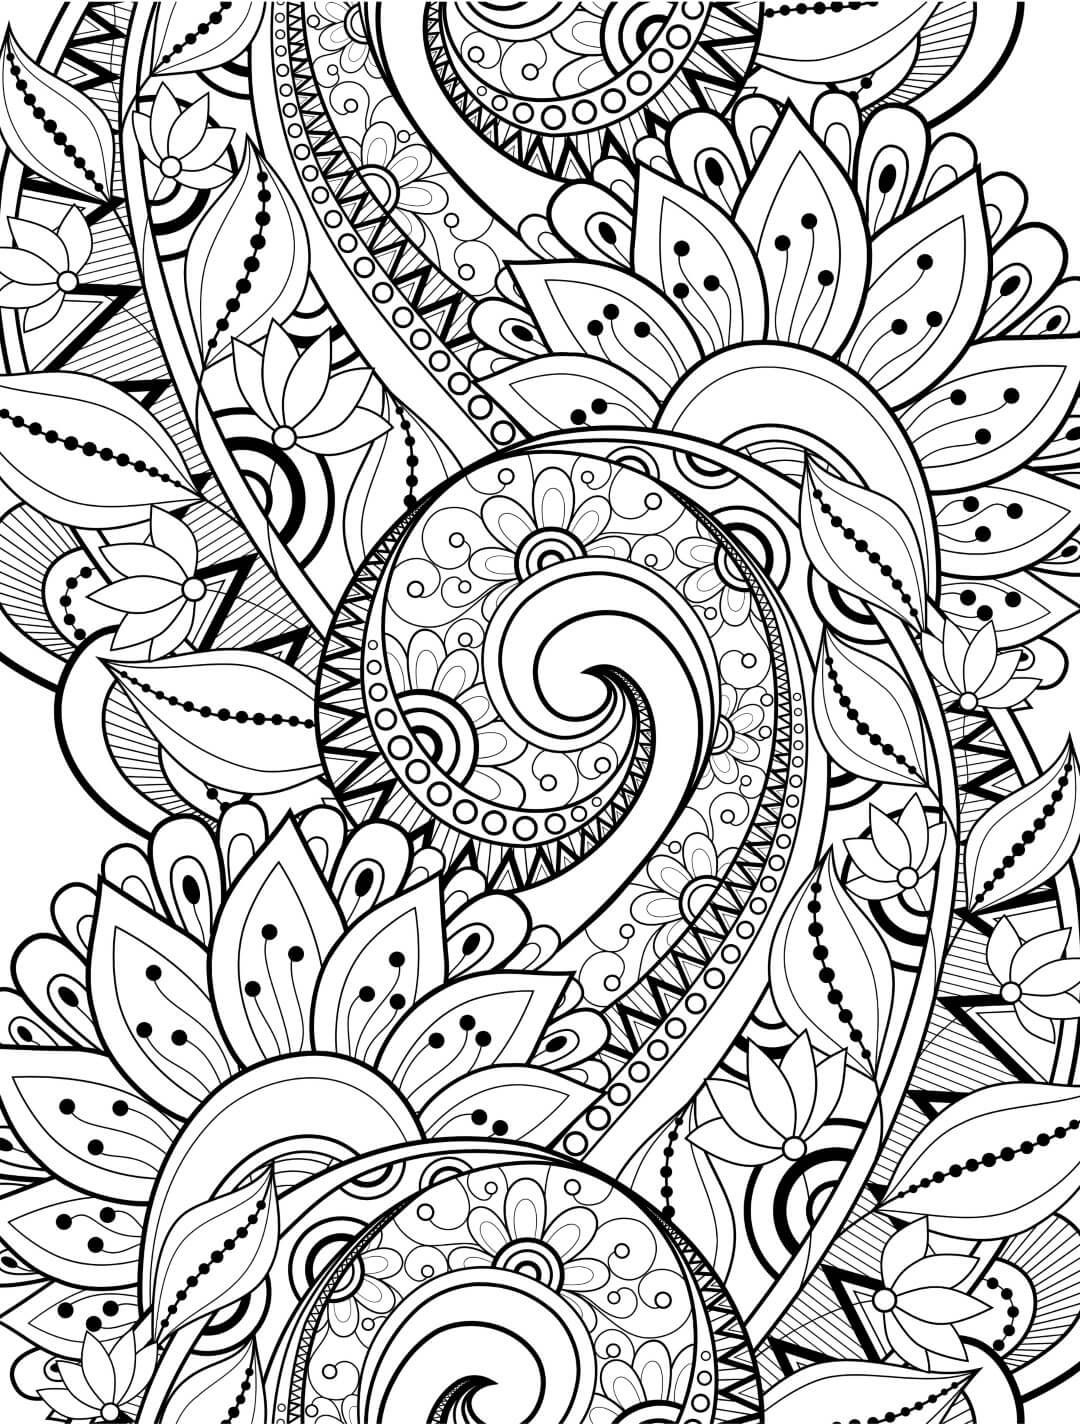 Zen Flowers with Swirl Adult Coloring